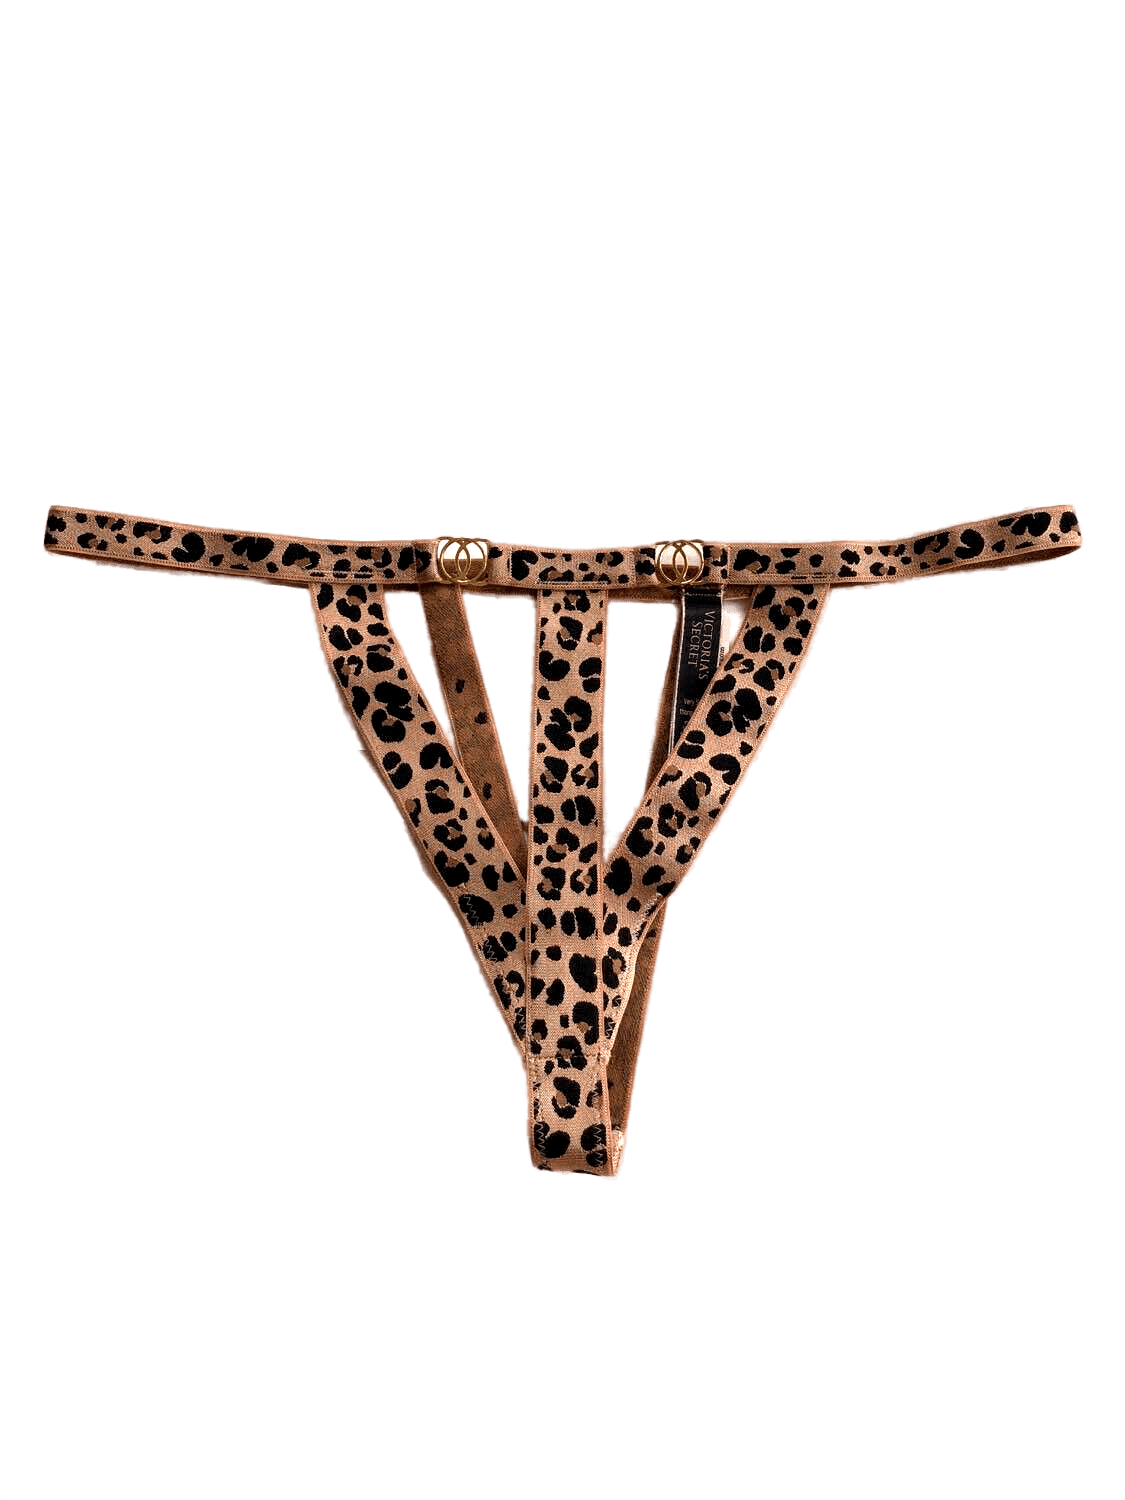 Victorias Secret Very Sexy Strappy Thong Panty Brown Leopard Medium Nwt 